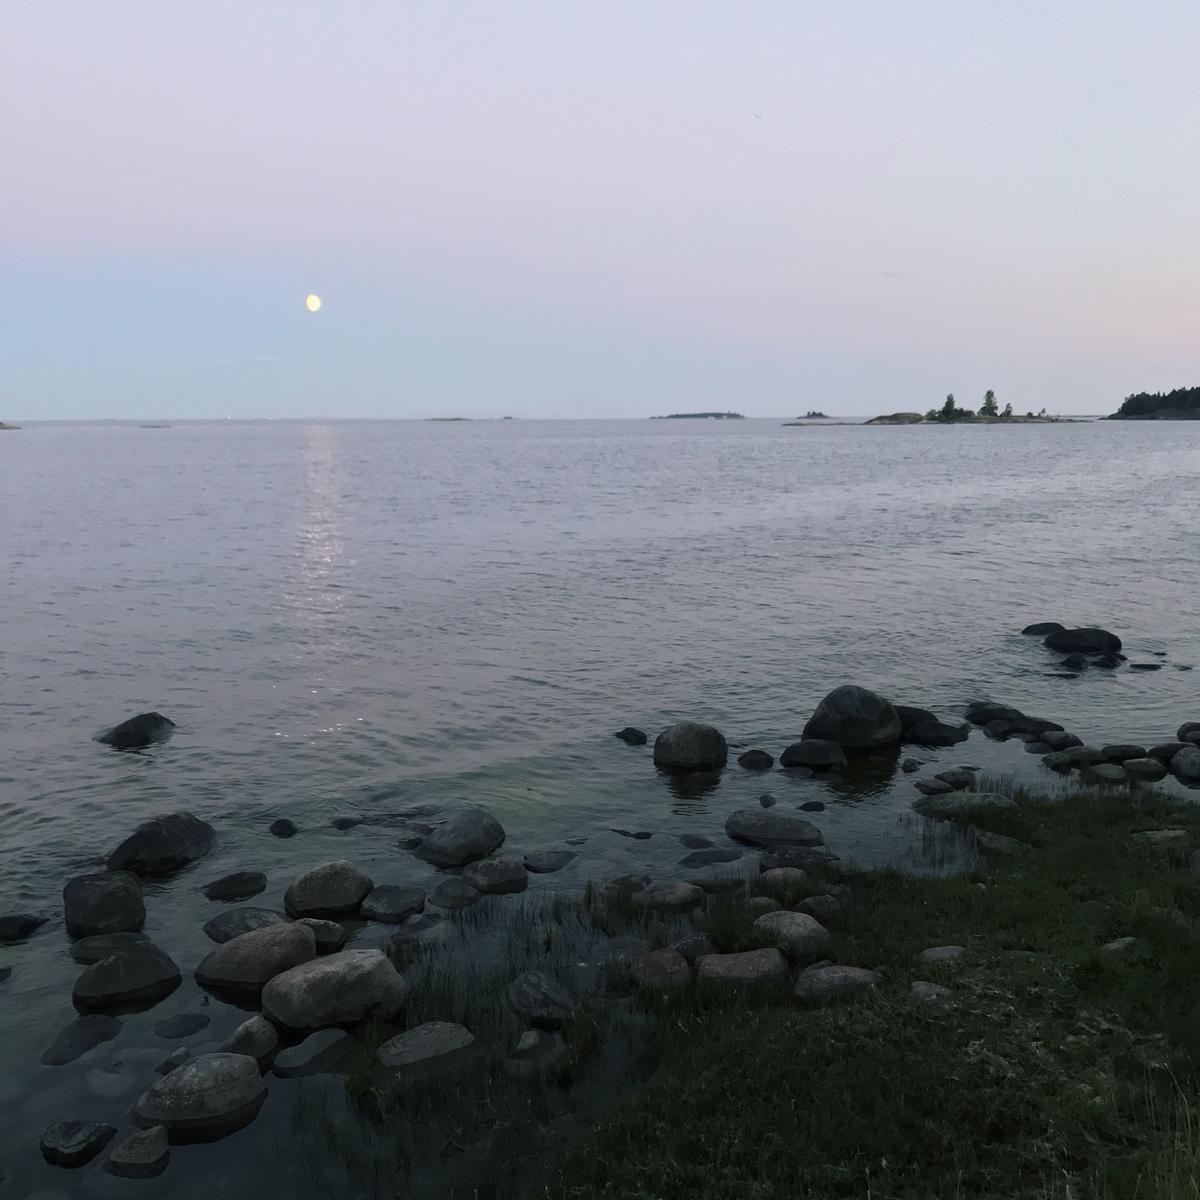 Moon shining over the sea in the evening. There's a rocky shore close to the camera and small islands in the horizon.